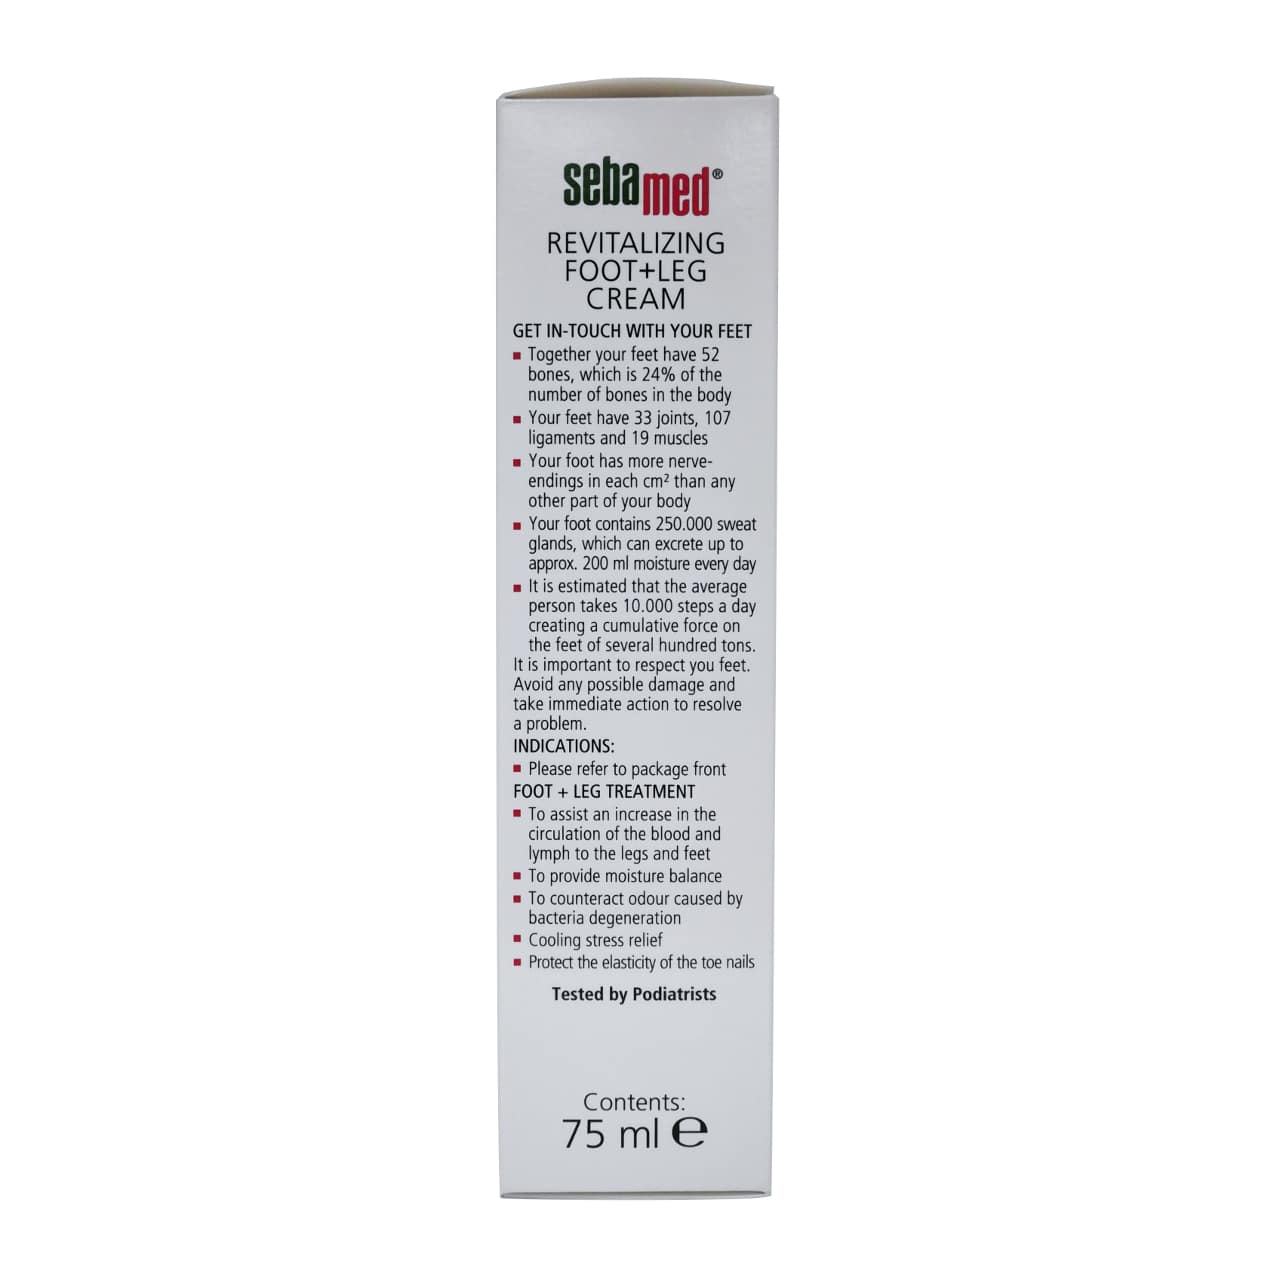 Product details and information for Sebamed Revitalizing Foot and Leg Cream